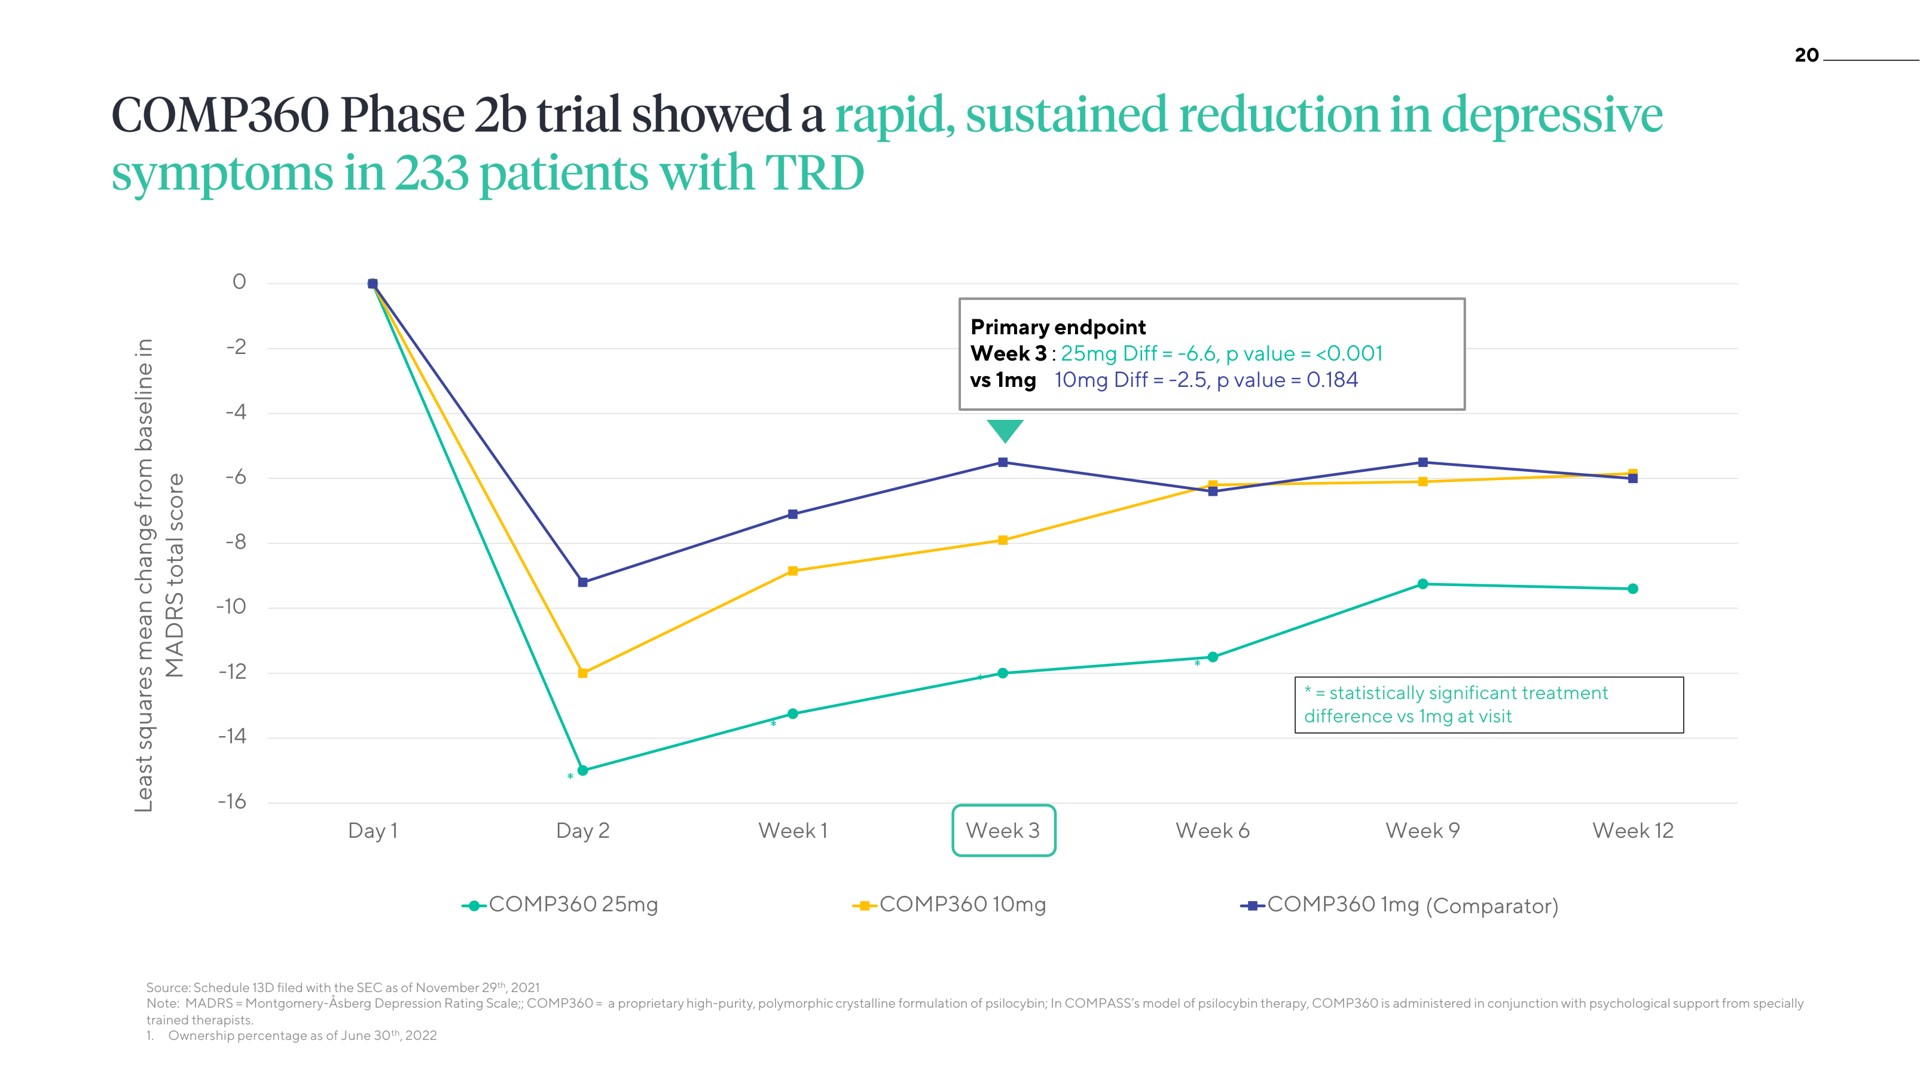 primary week value value statistically significant treatment difference at visit day day week week week week week comparator phase trial showed a rapid sustained reduction in depressive | ATAI